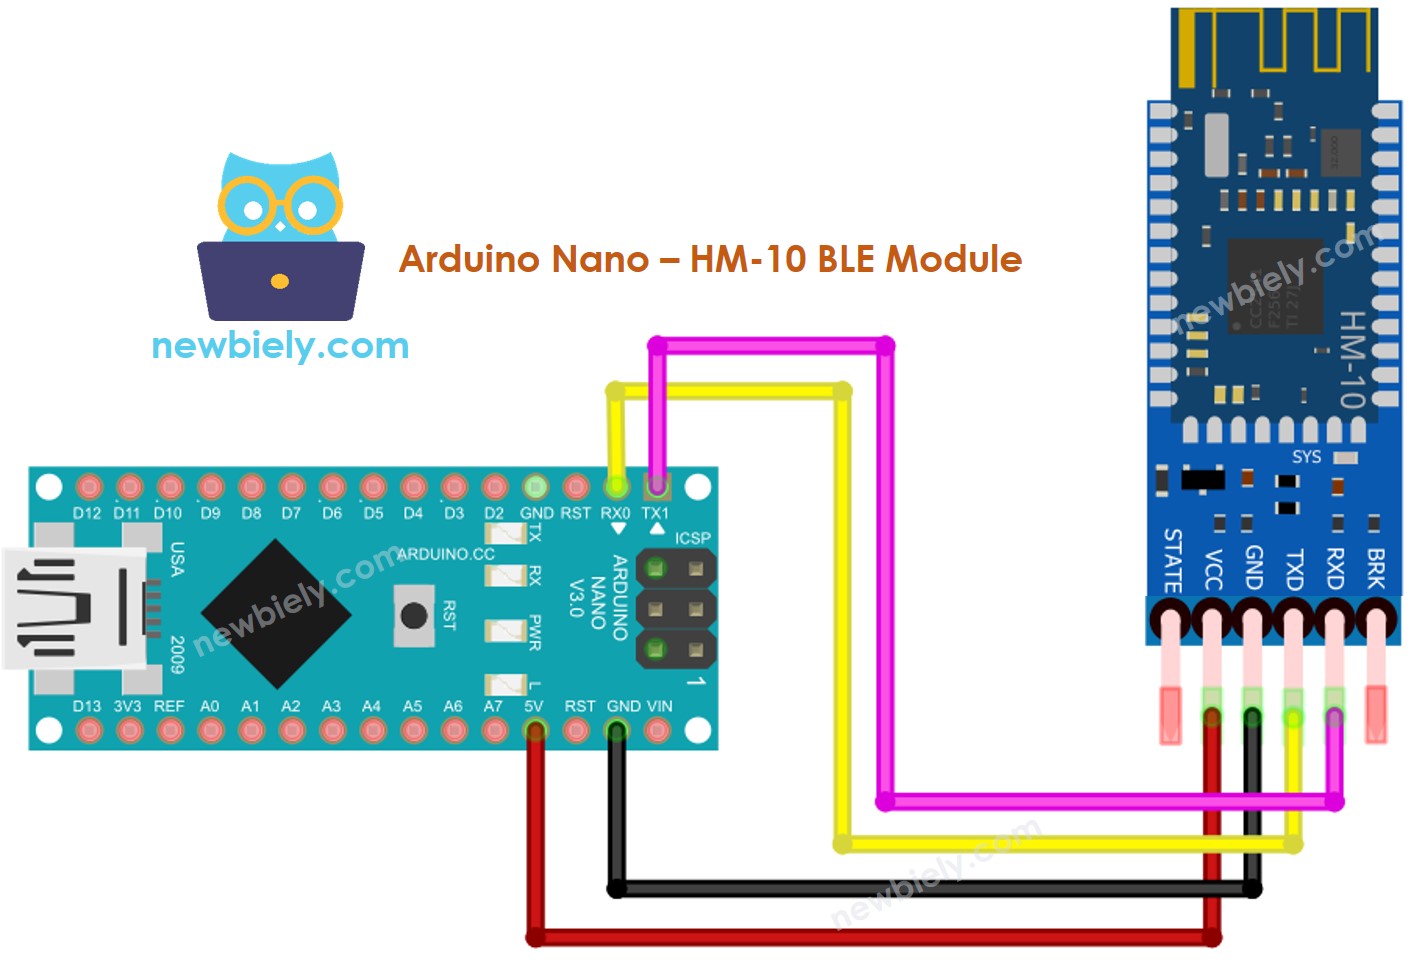 The wiring diagram between Arduino Nano and BLE